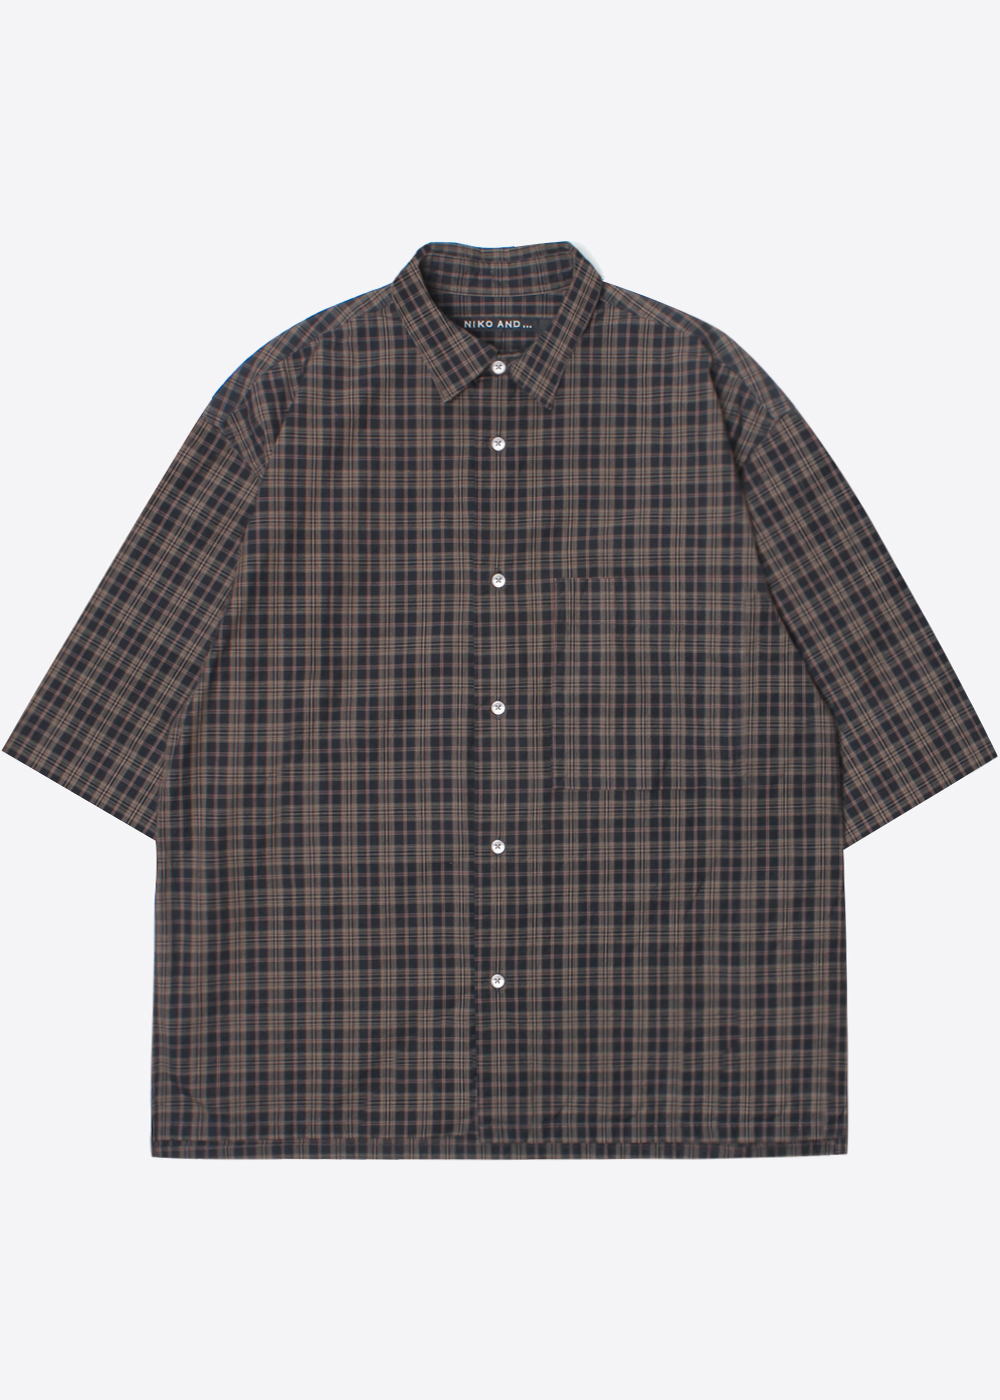 NIKO AND’over fit’ cotton check shirt